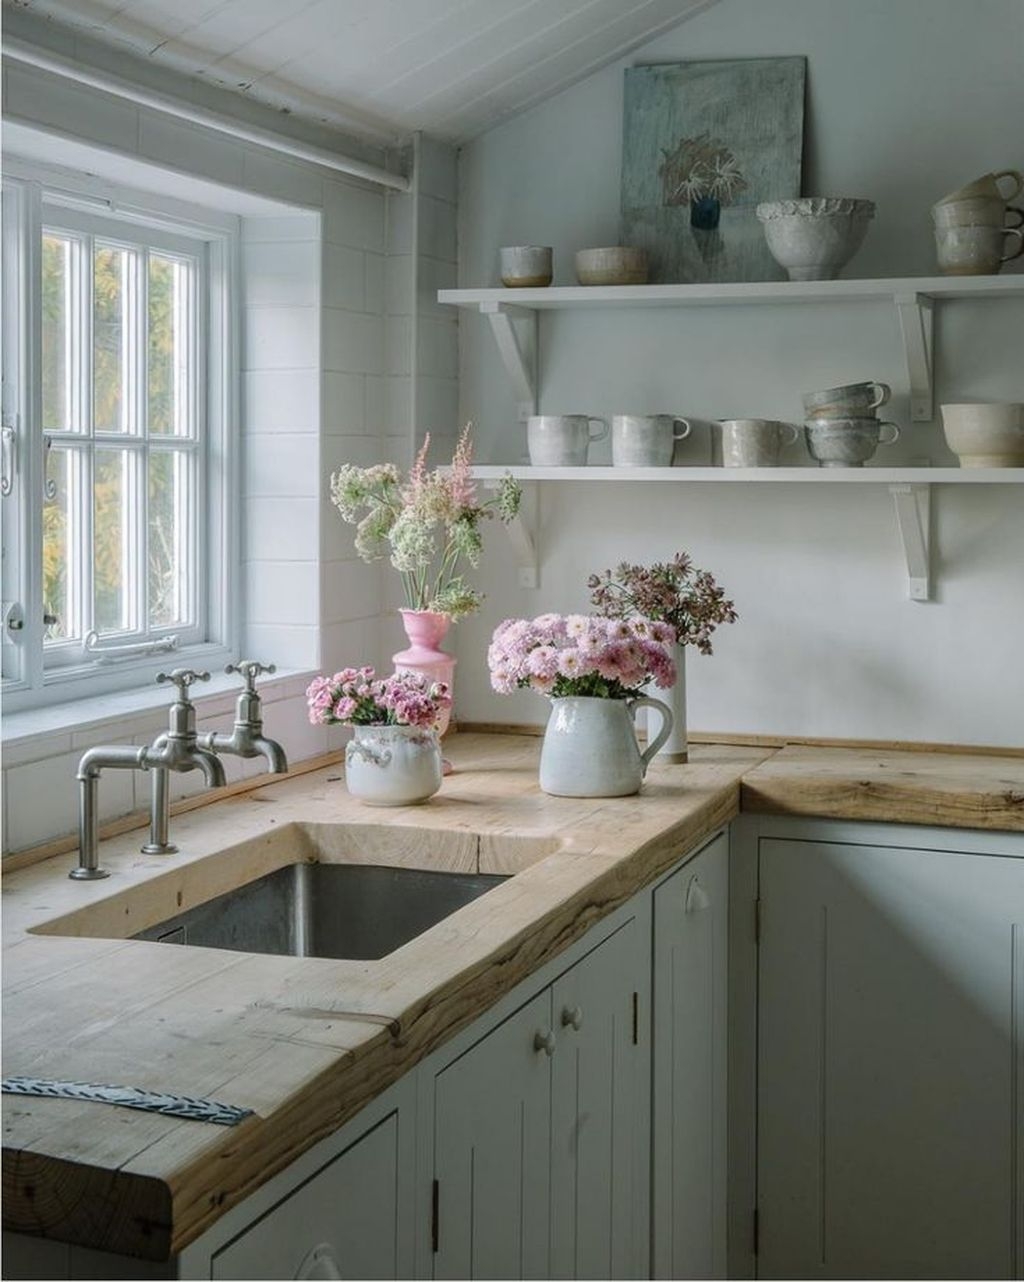 Rustic Farmhouse Kitchen Ideas To Get Traditional Accent 08